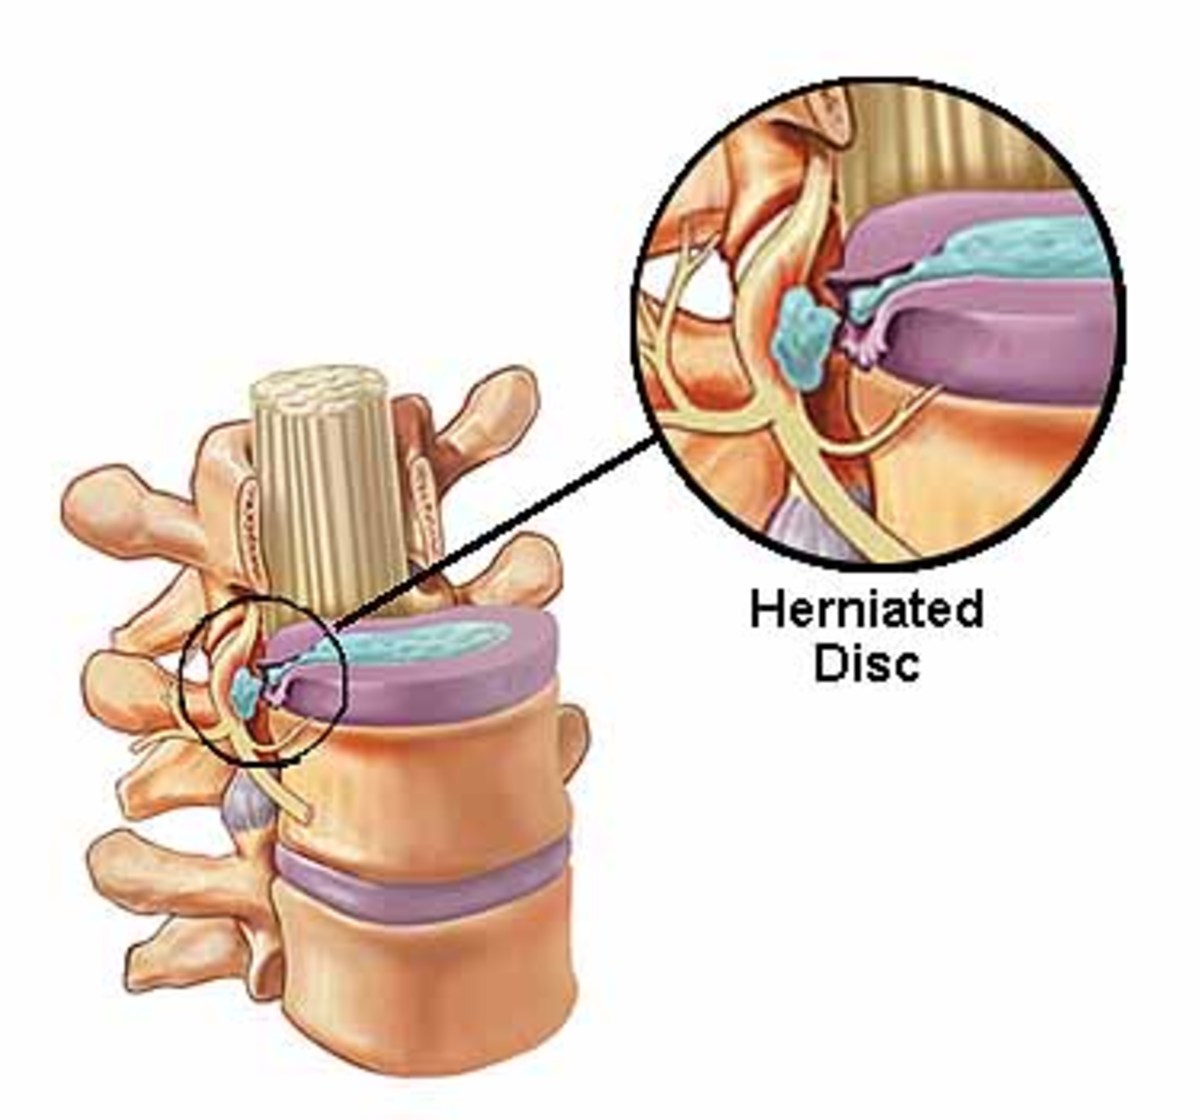 Herniated Disc Treatment Options and My Experience